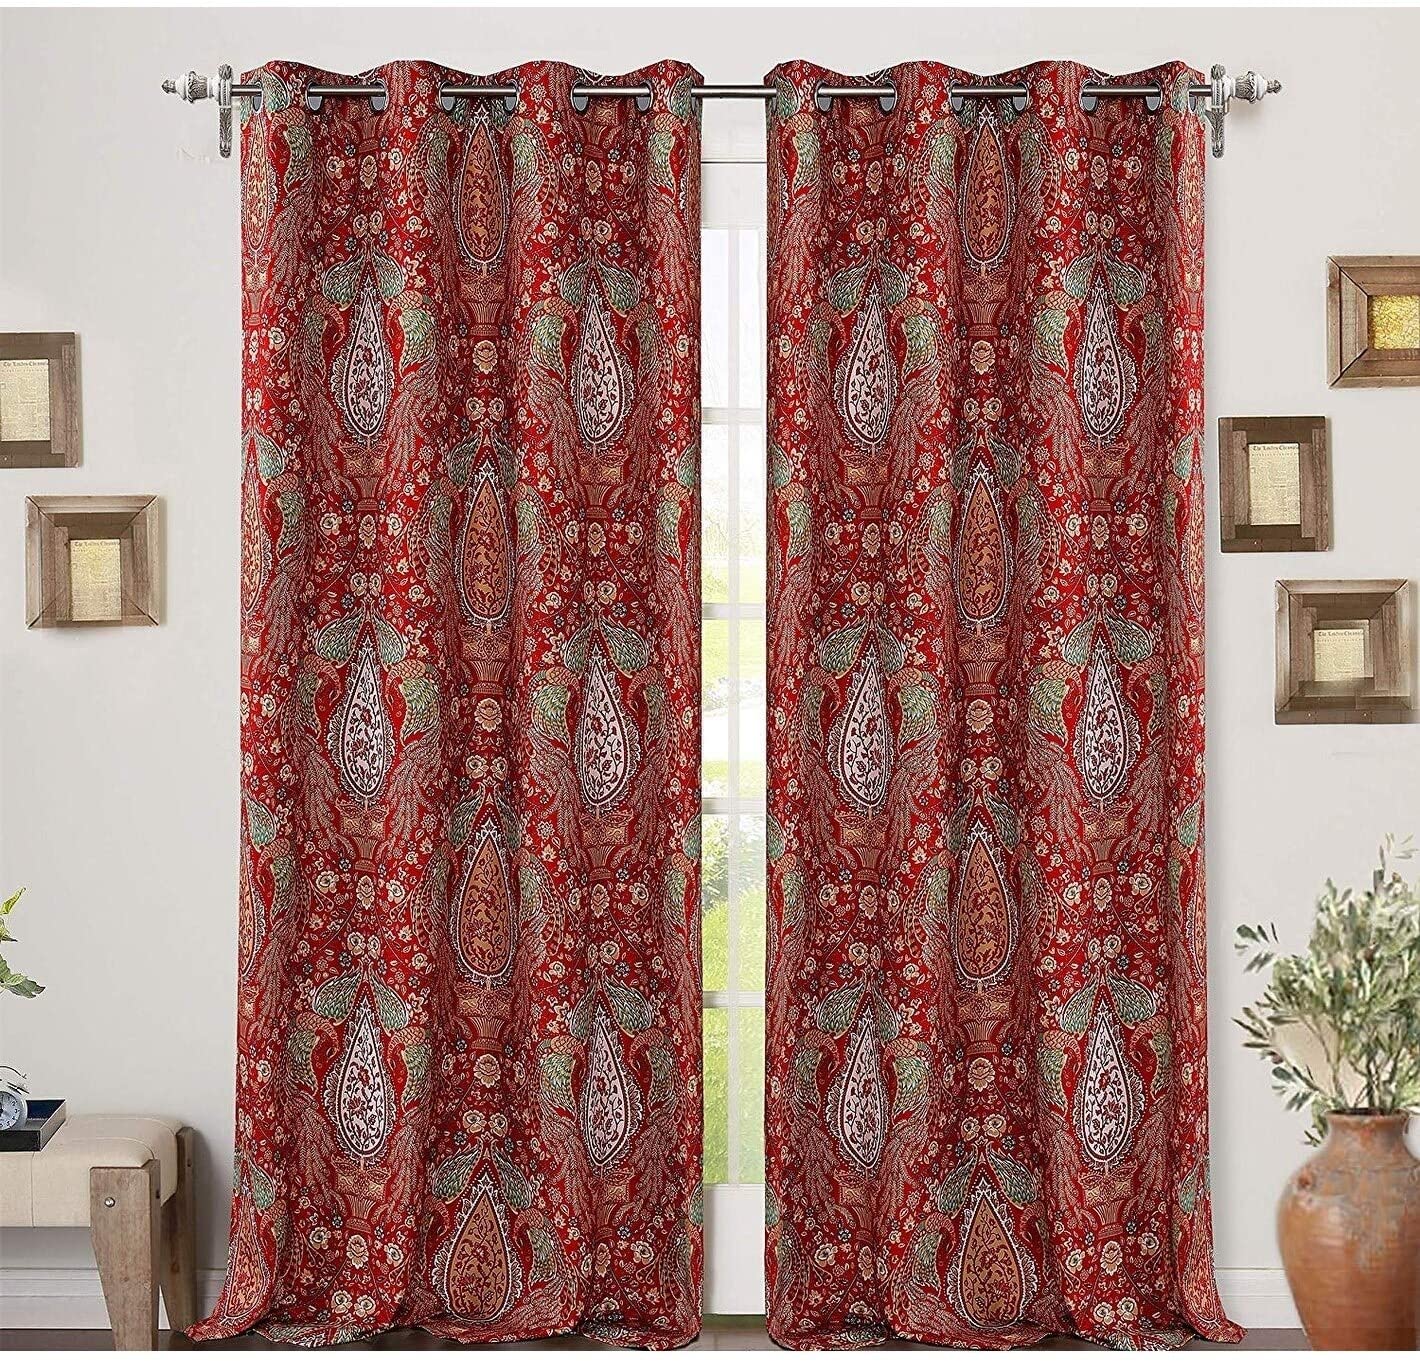 MISC Peacock Floral Pattern Blackout Window Curtain Grommet 2 Layers Panels 52' Width X 84' Length Red Animal French Country Polyester Thermal